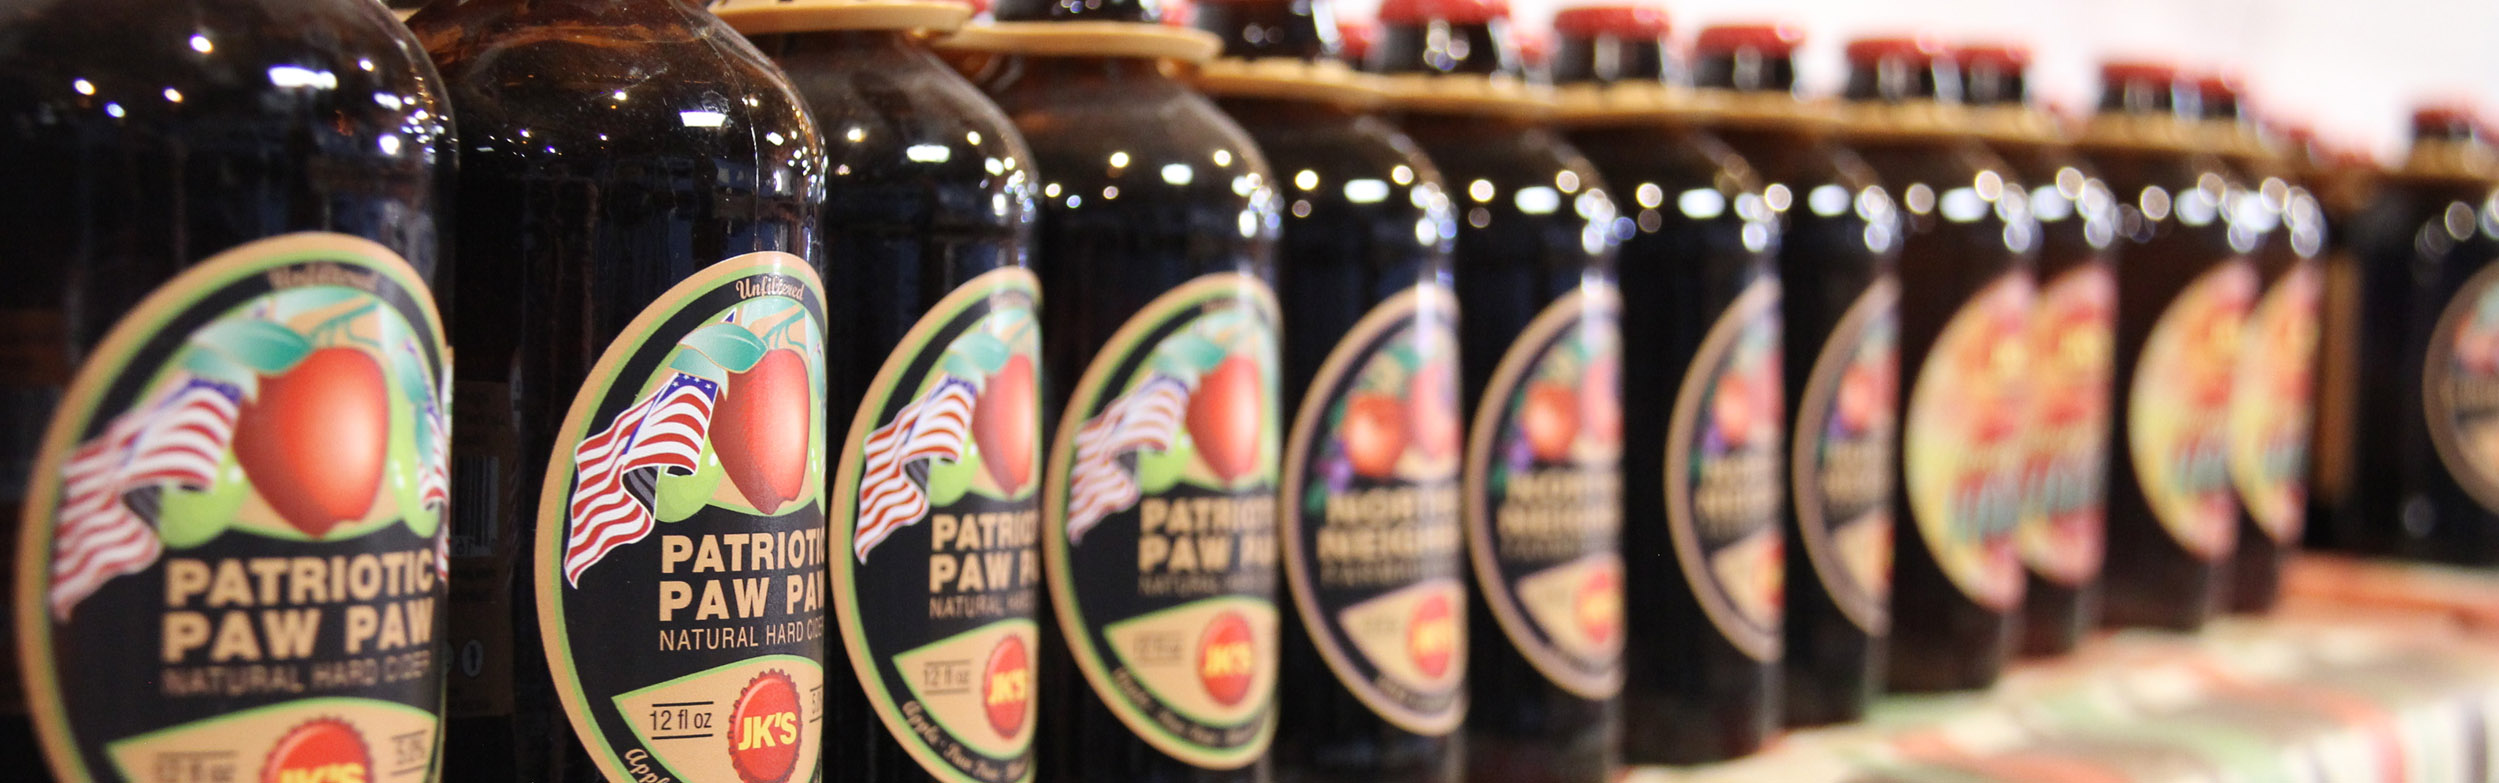 A shelf inside the Almar Orchards fruit market is lined with a row of Patriot Paw Paw hard cider growlers.